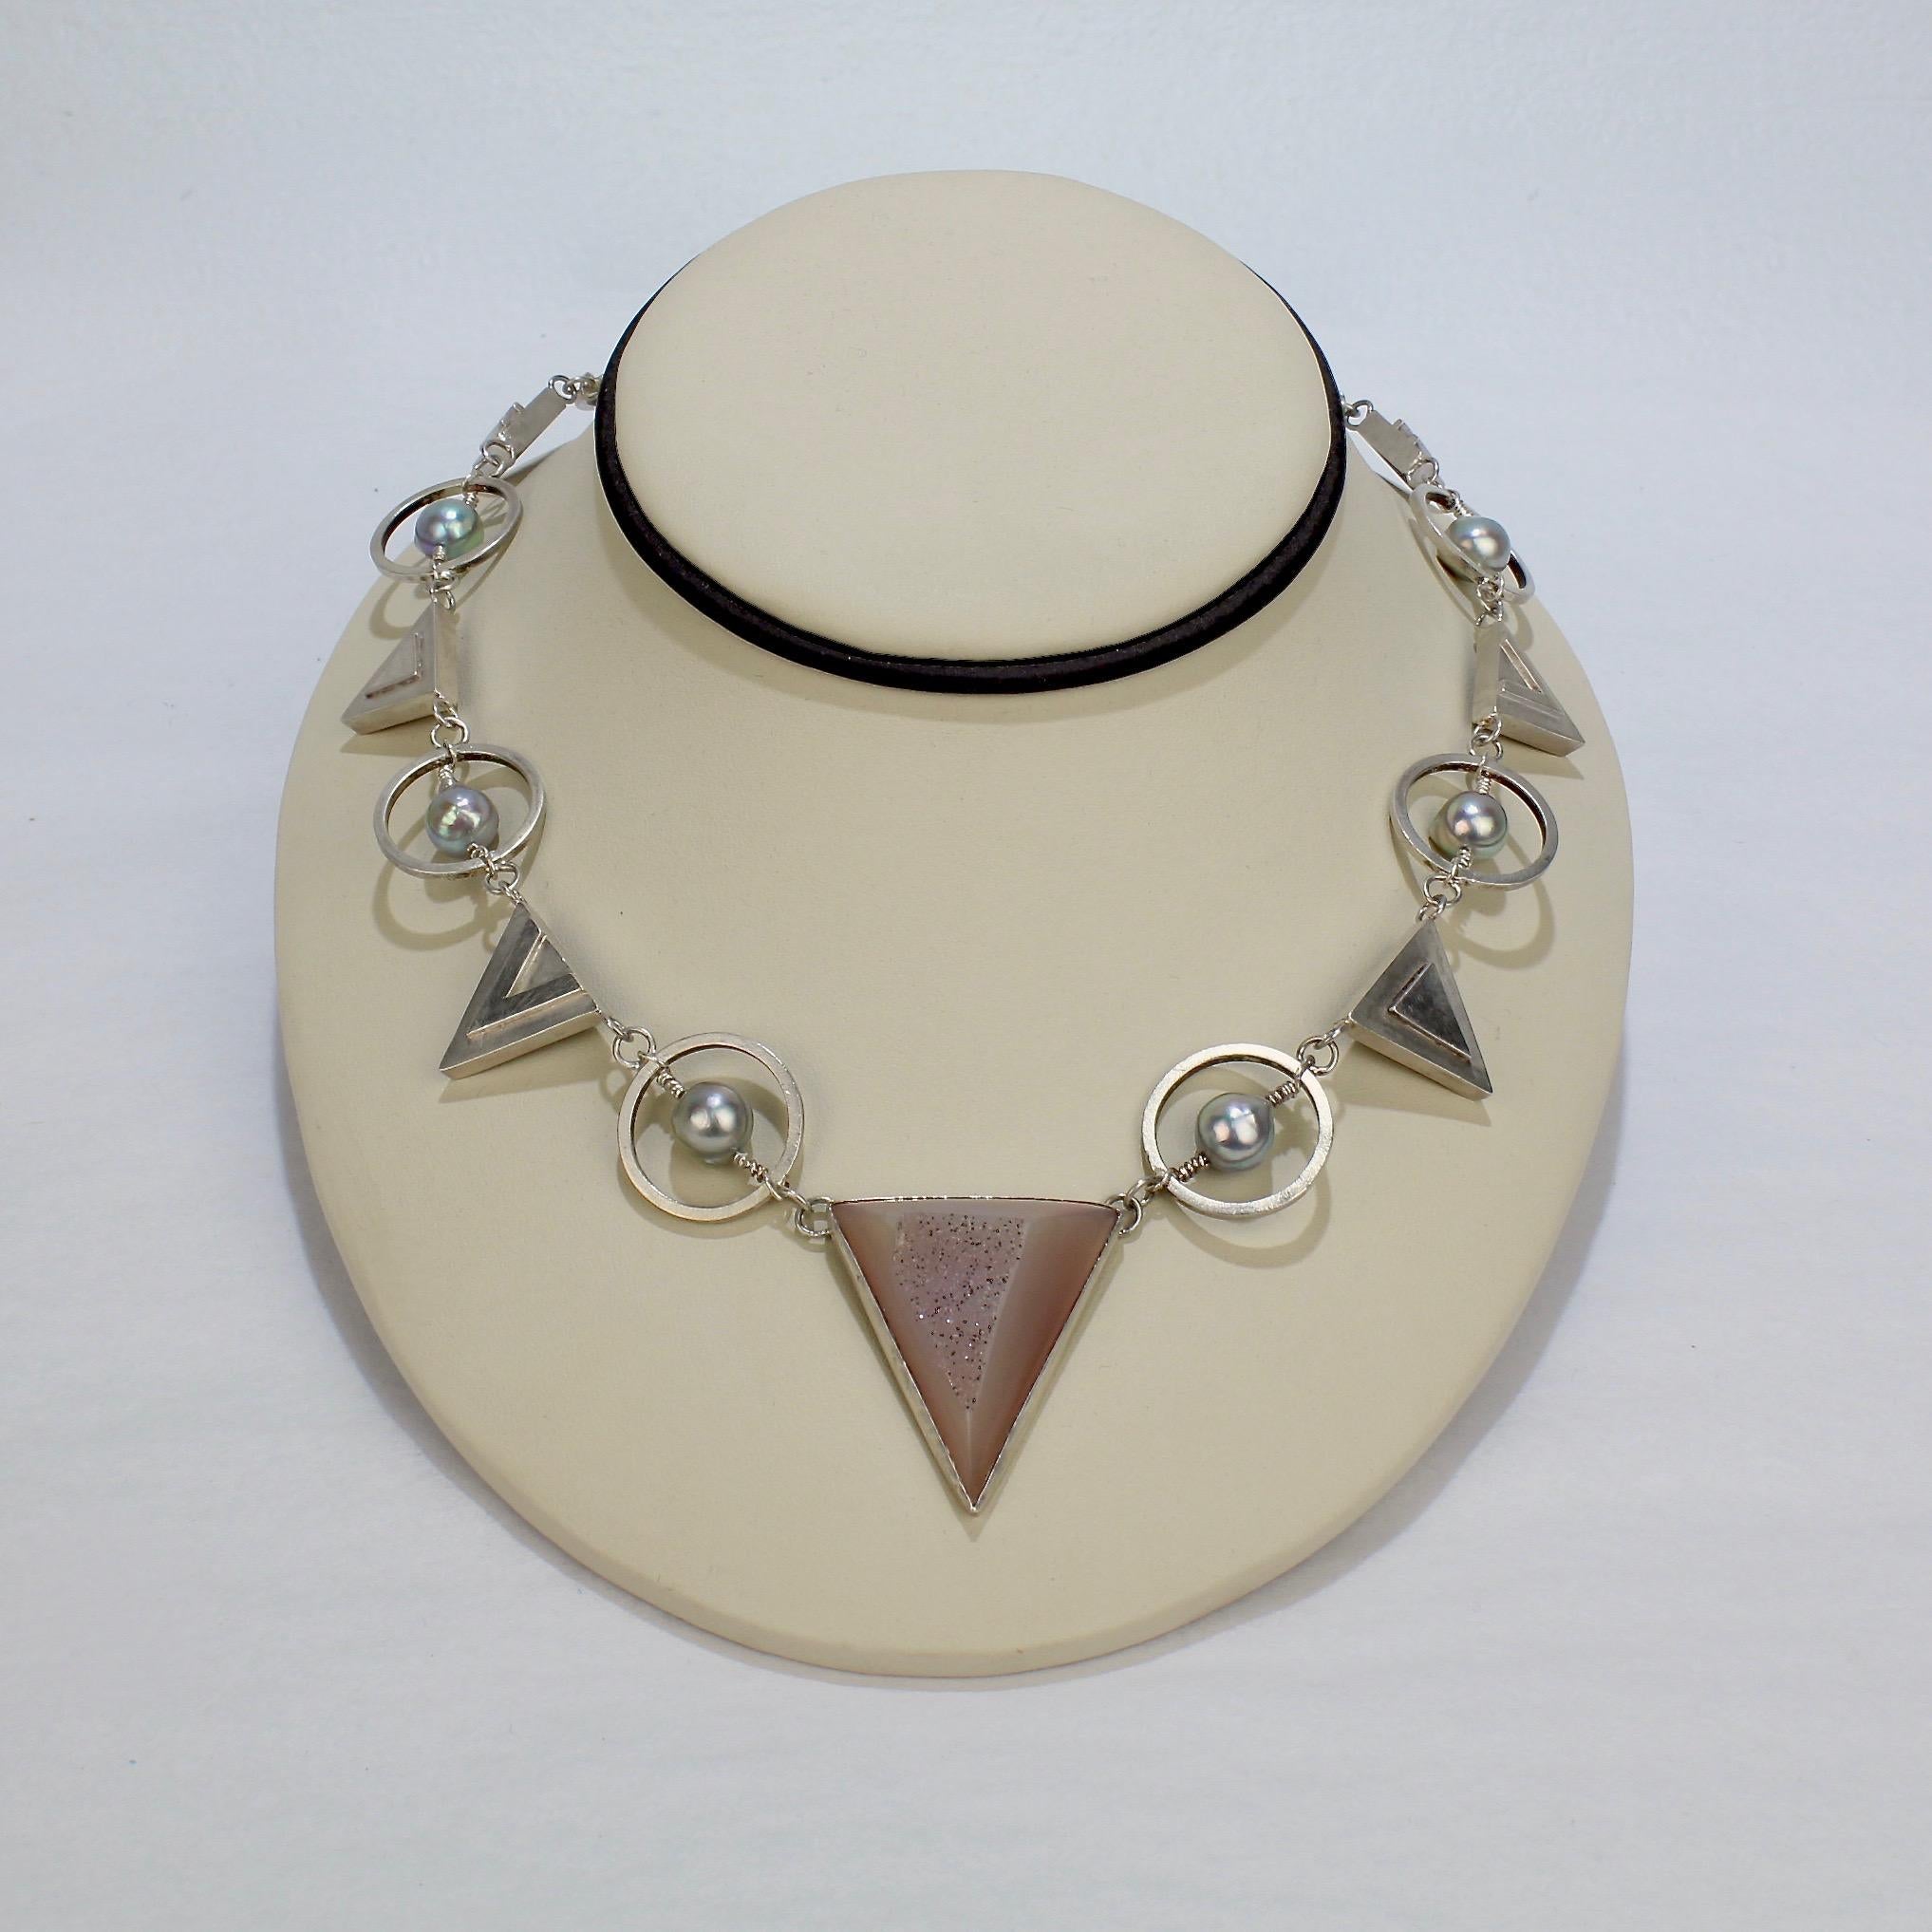 A Retro, geometric necklace and earring parure by Yumi Ueno.  

In sterling silver with alternating triangle and circles centered on a large triangular amethyst druzy pedant. The circle devices are set with grey-blue baroque pearls on twisted wire. 